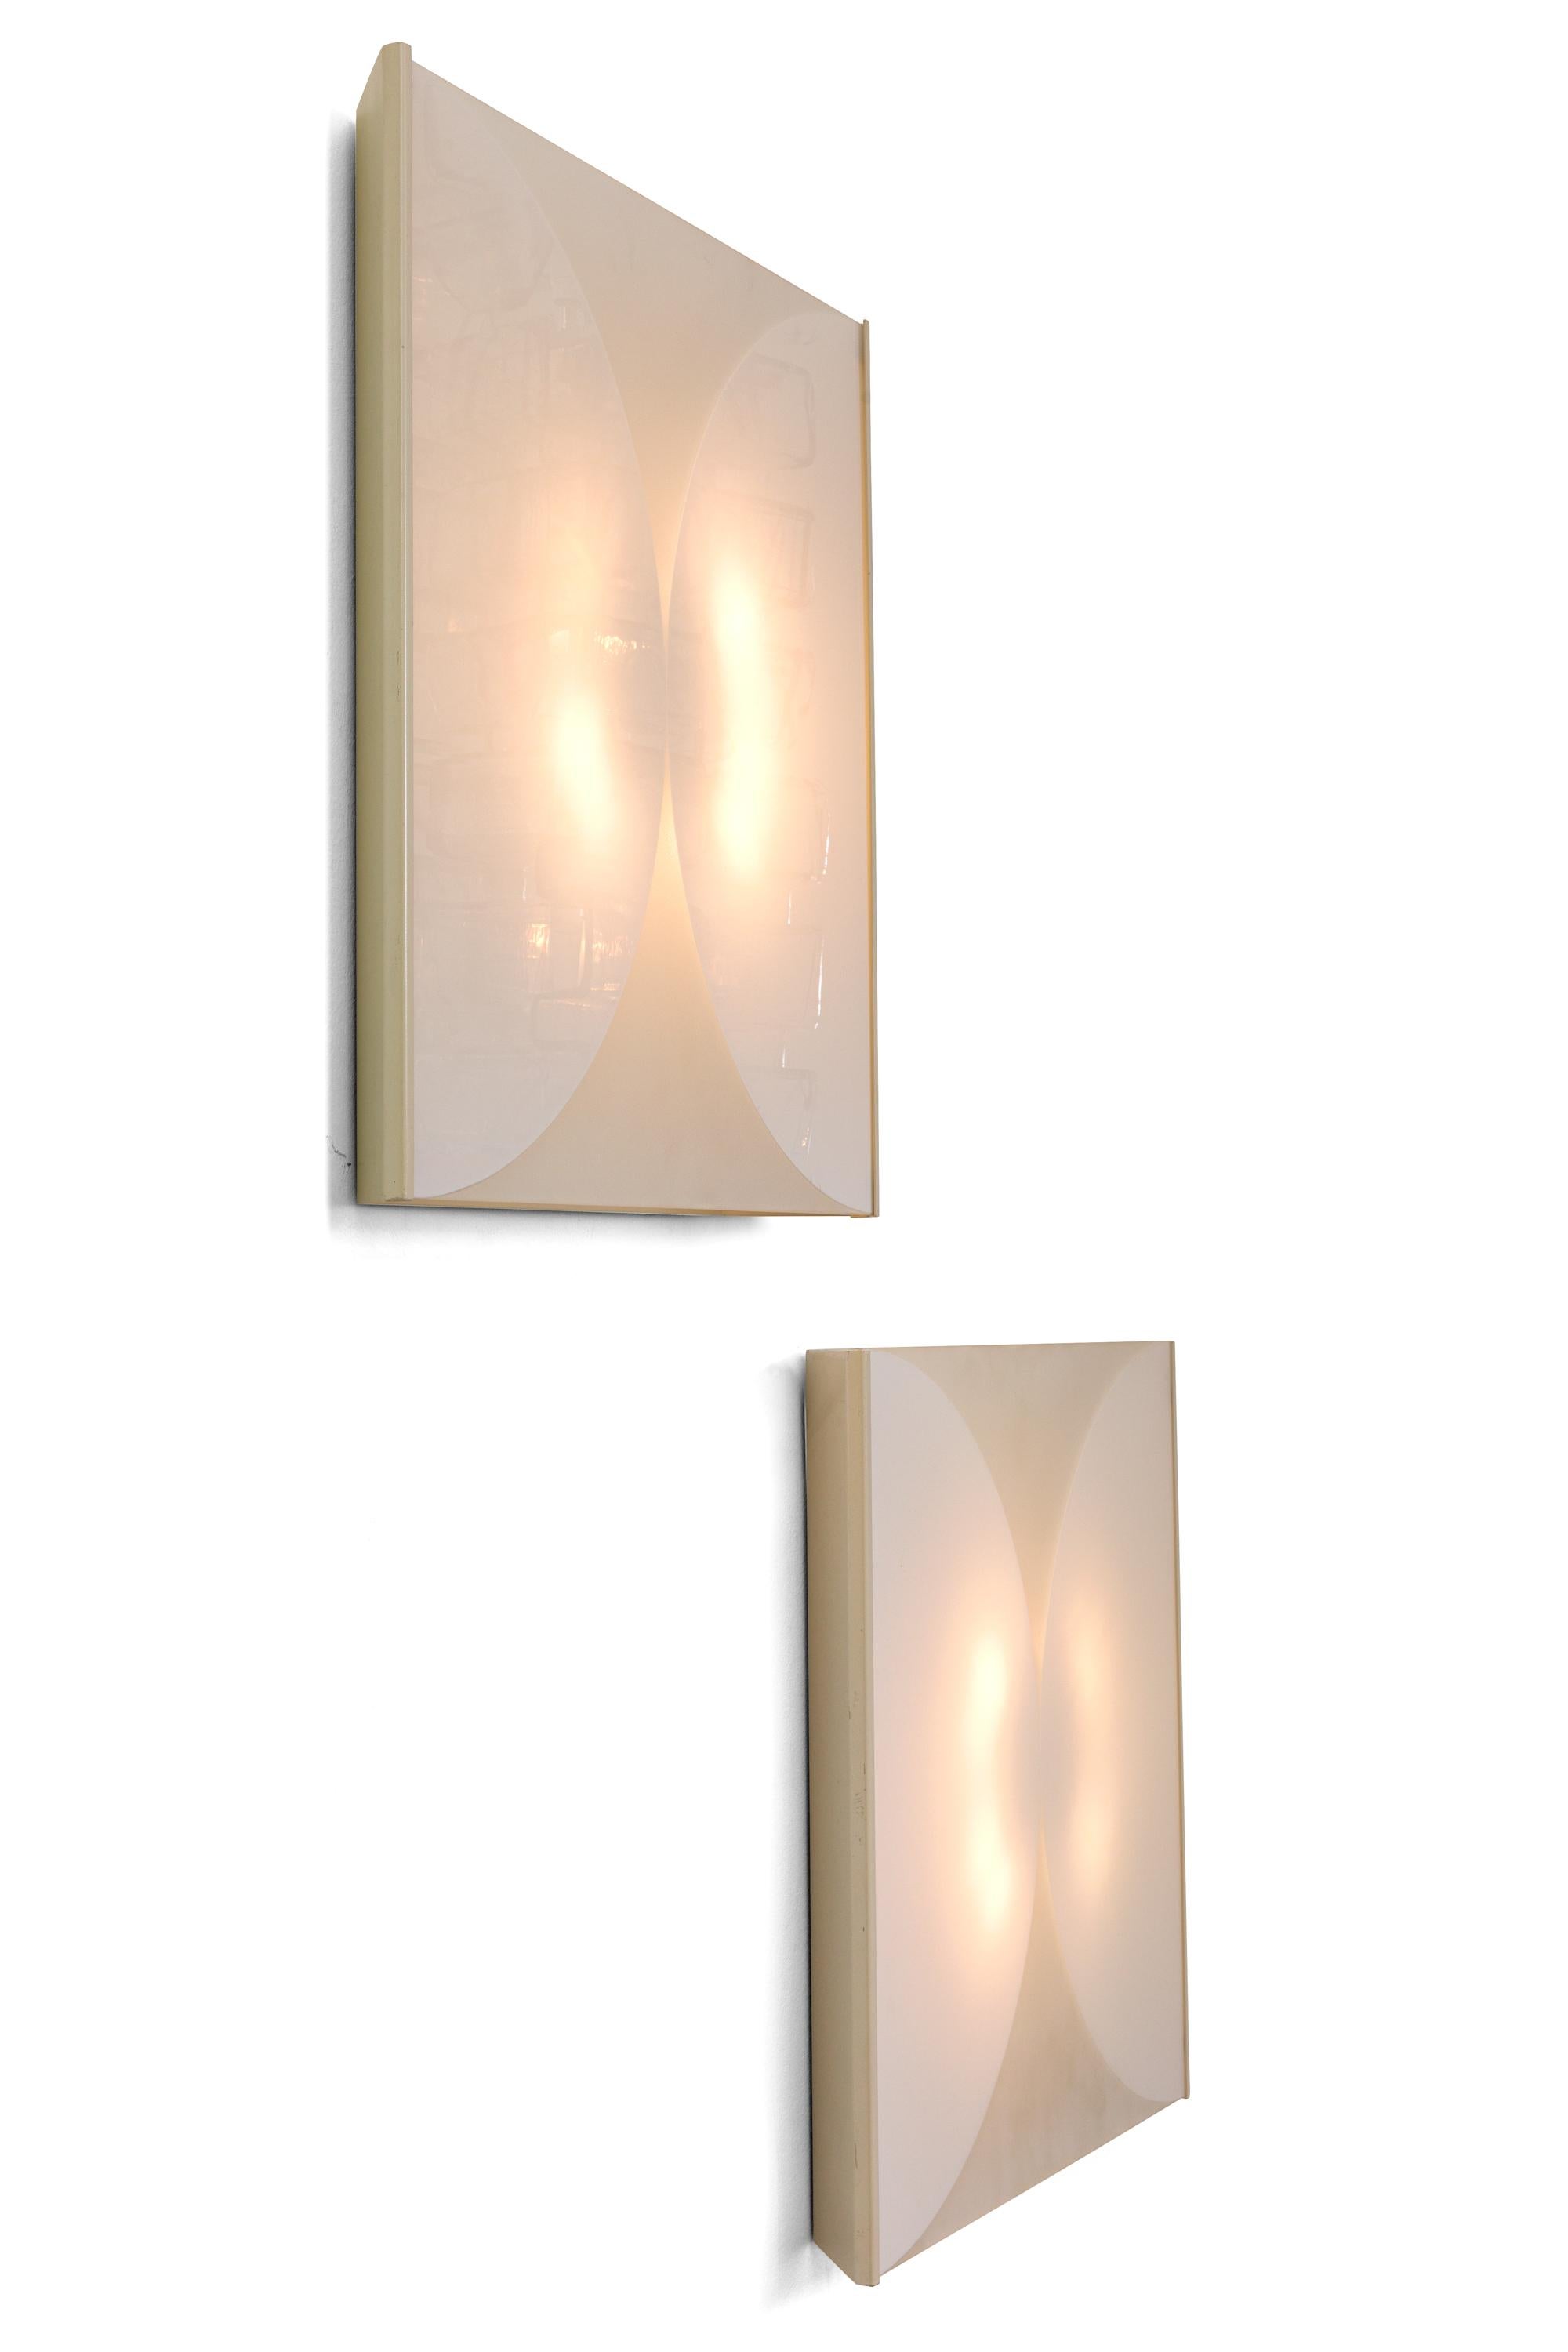 These lights are made with glass panels that have been sandblasted to create the design and are housed in a shallow white metal frame. Available as a pair or singly.